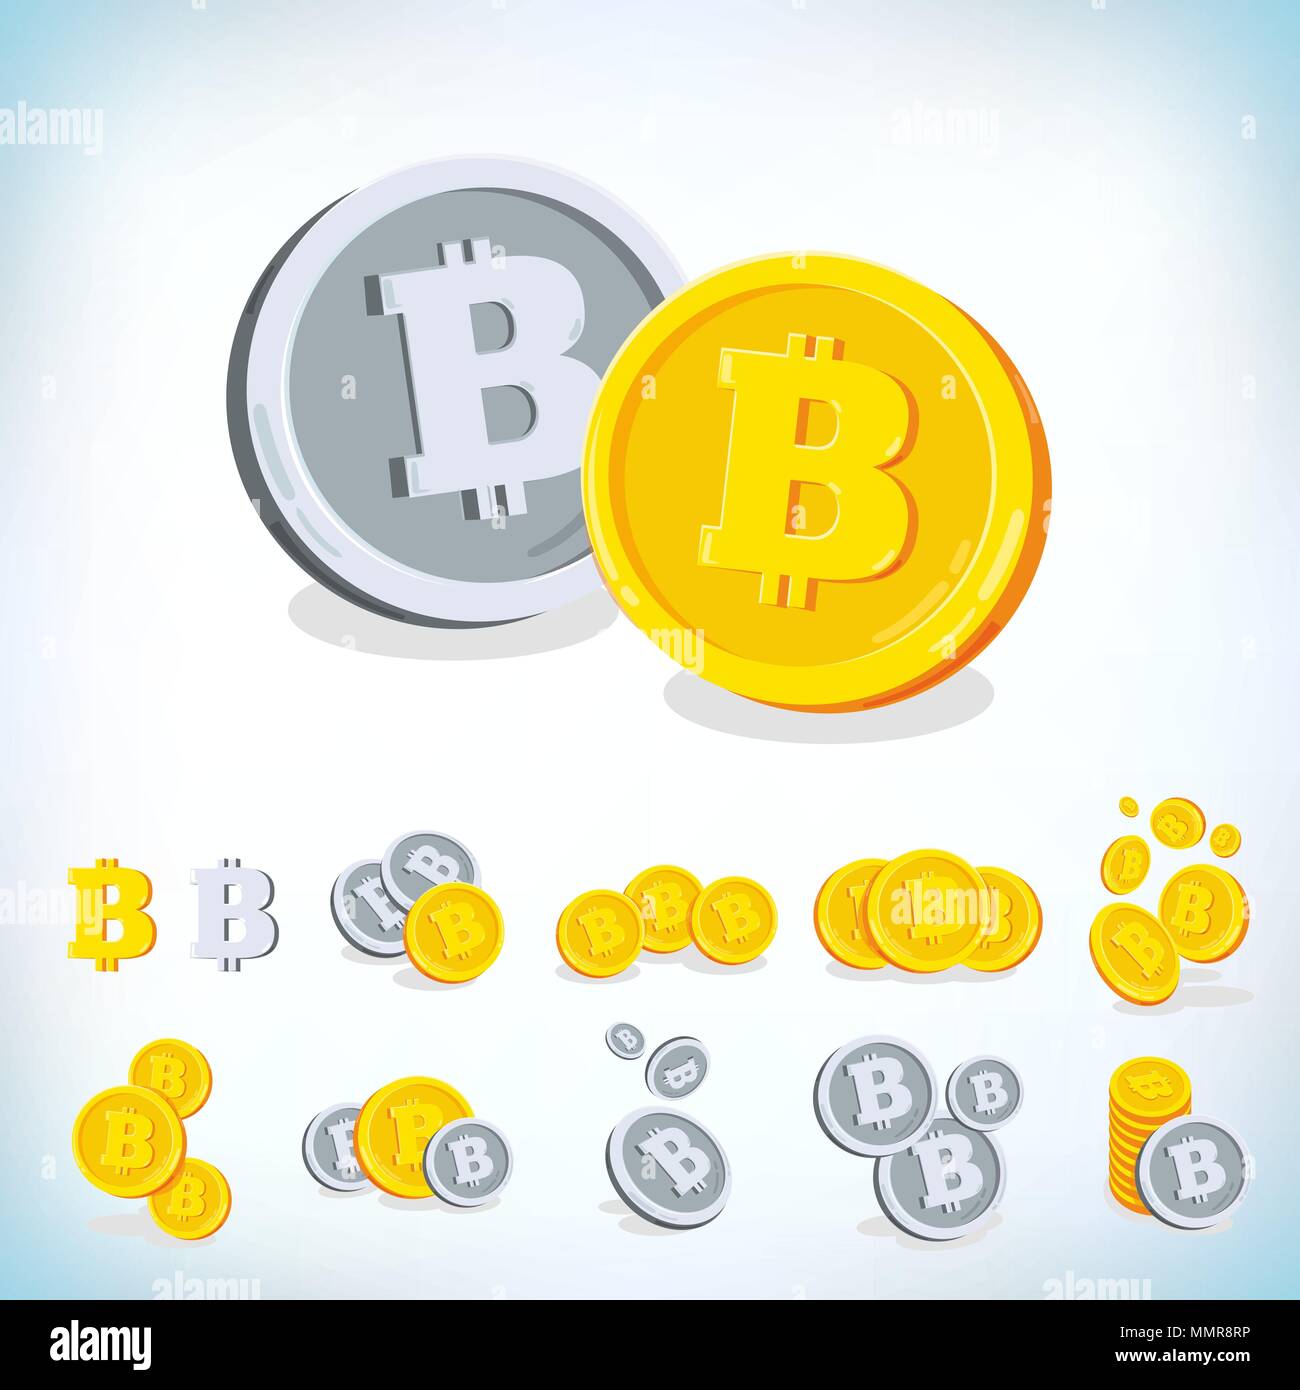 Bitcoin. 2D cartoon bit coin. Digital currency. Cryptocurrency. Golden coins with symbol isolated on white background. Vector illustration. Stock Vector